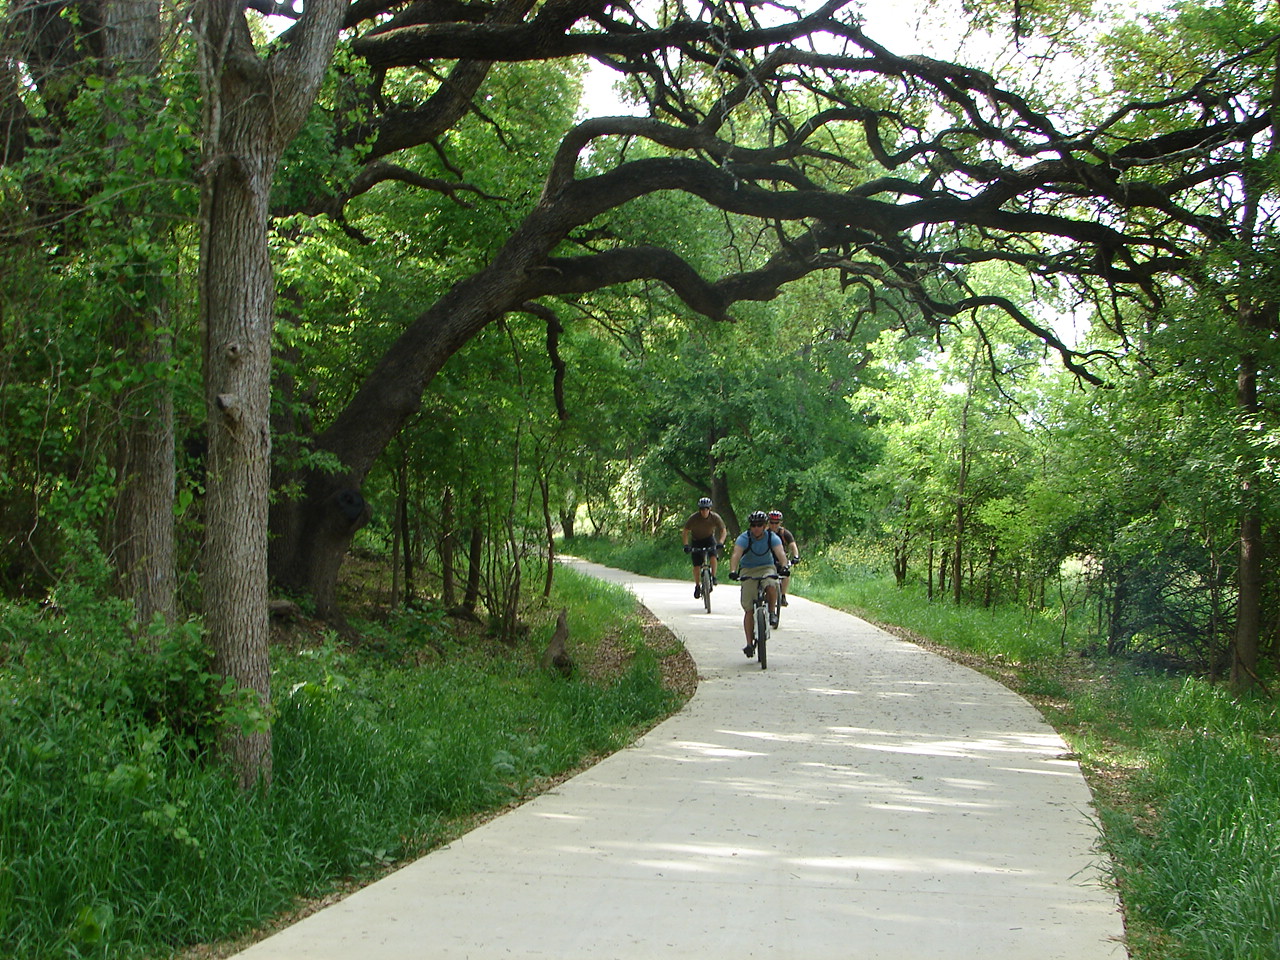 The Greenway Trails